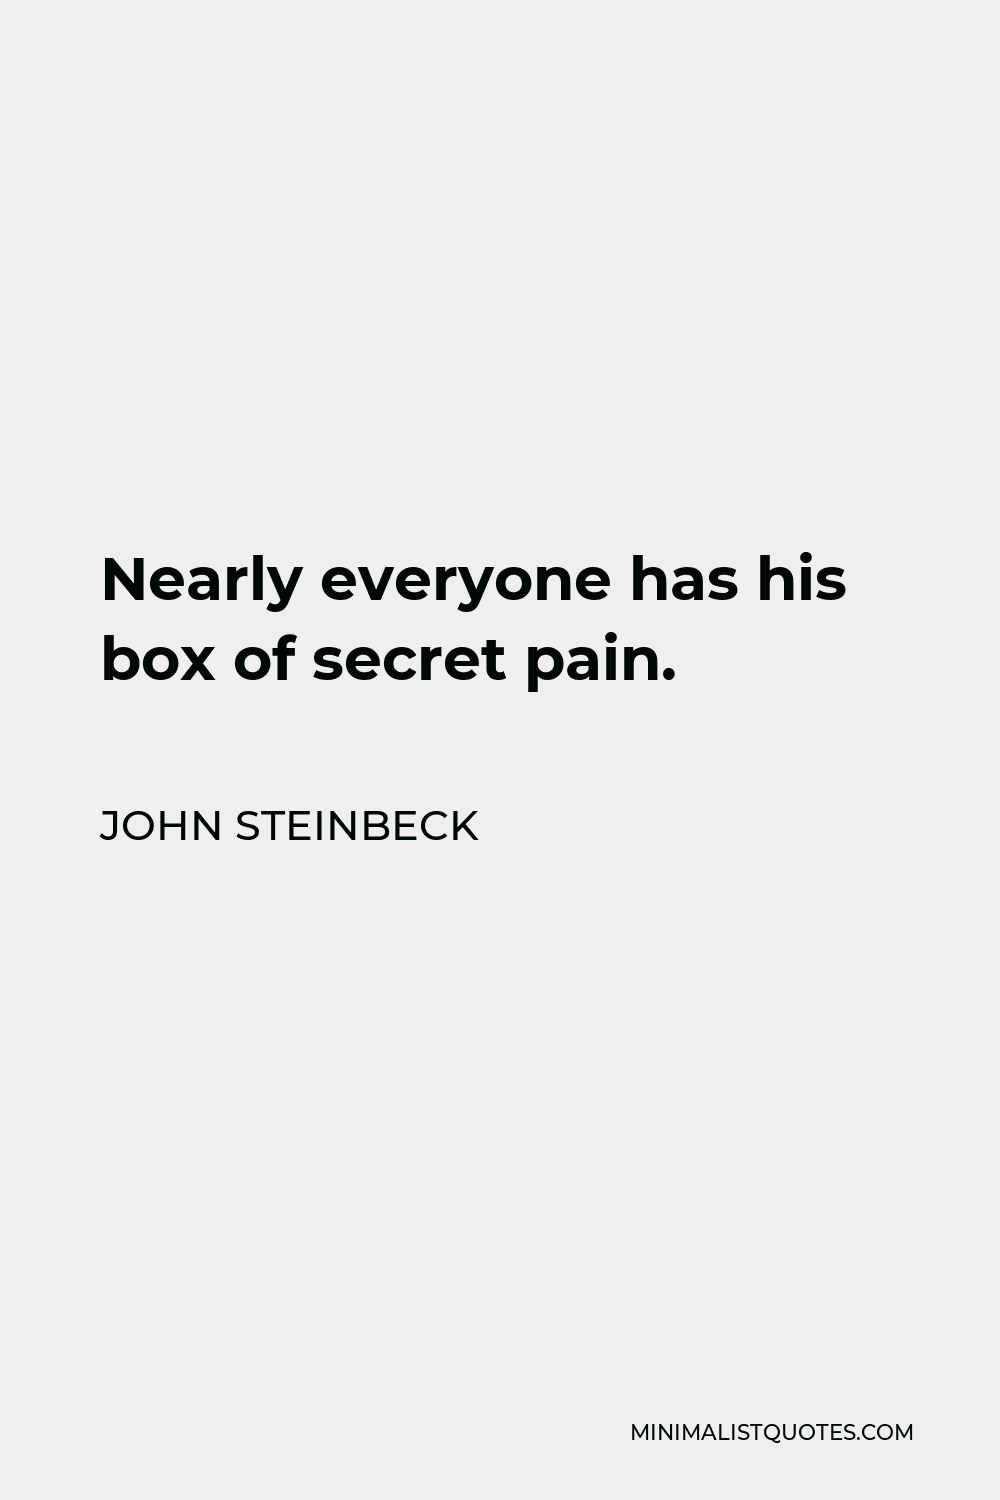 John Steinbeck Quote - Nearly everyone has his box of secret pain.